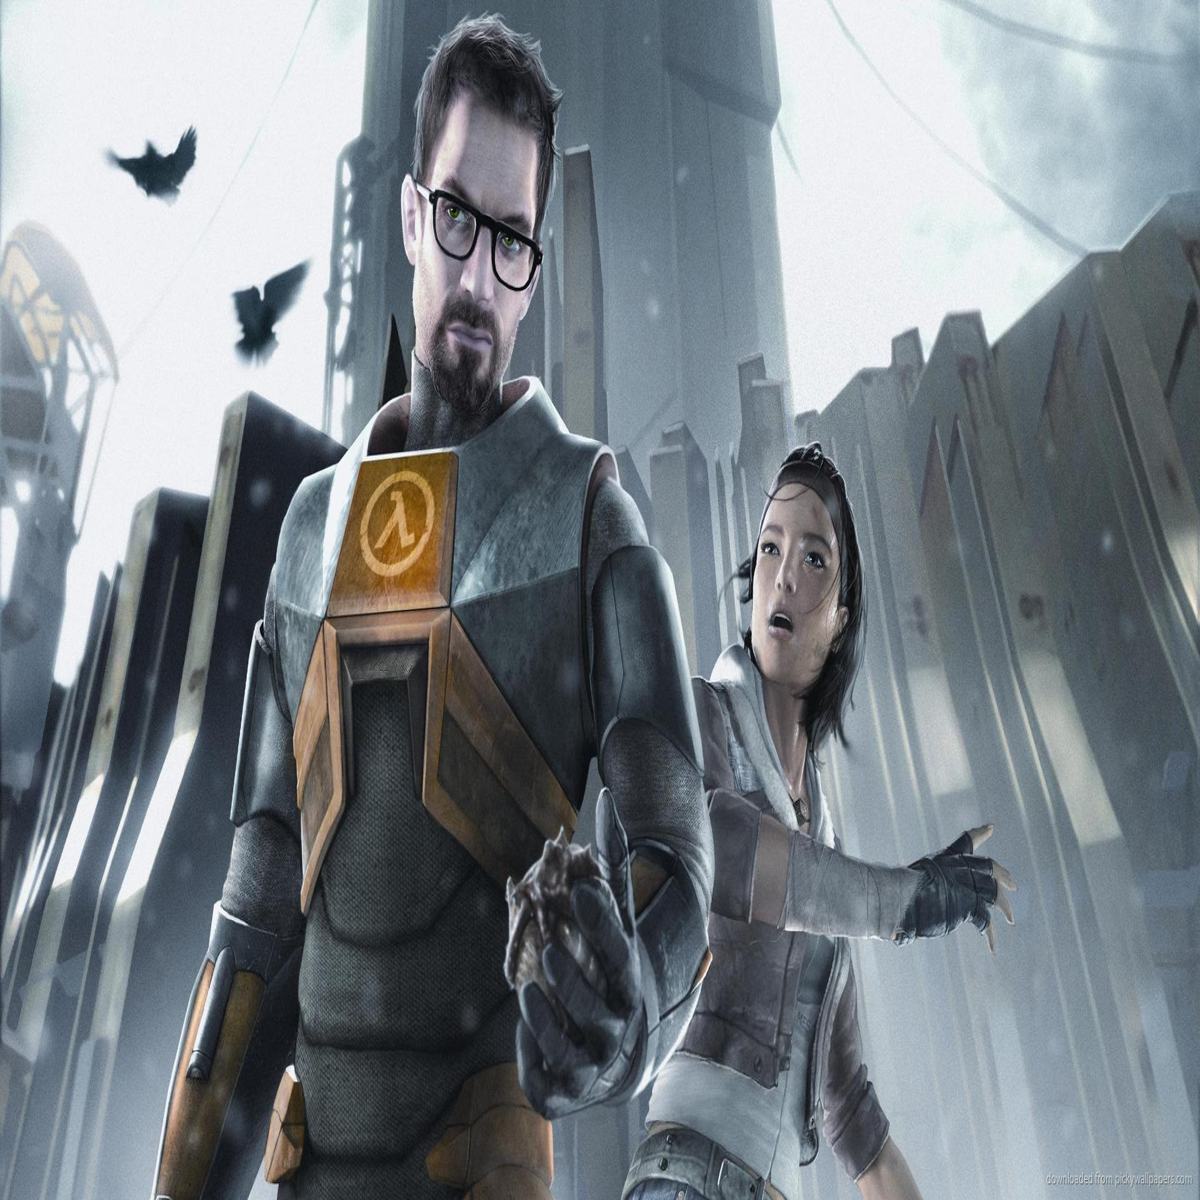 Modder Ports 'Half-Life 2' to VR Using 'Half-Life: Alyx' - Bloody Disgusting